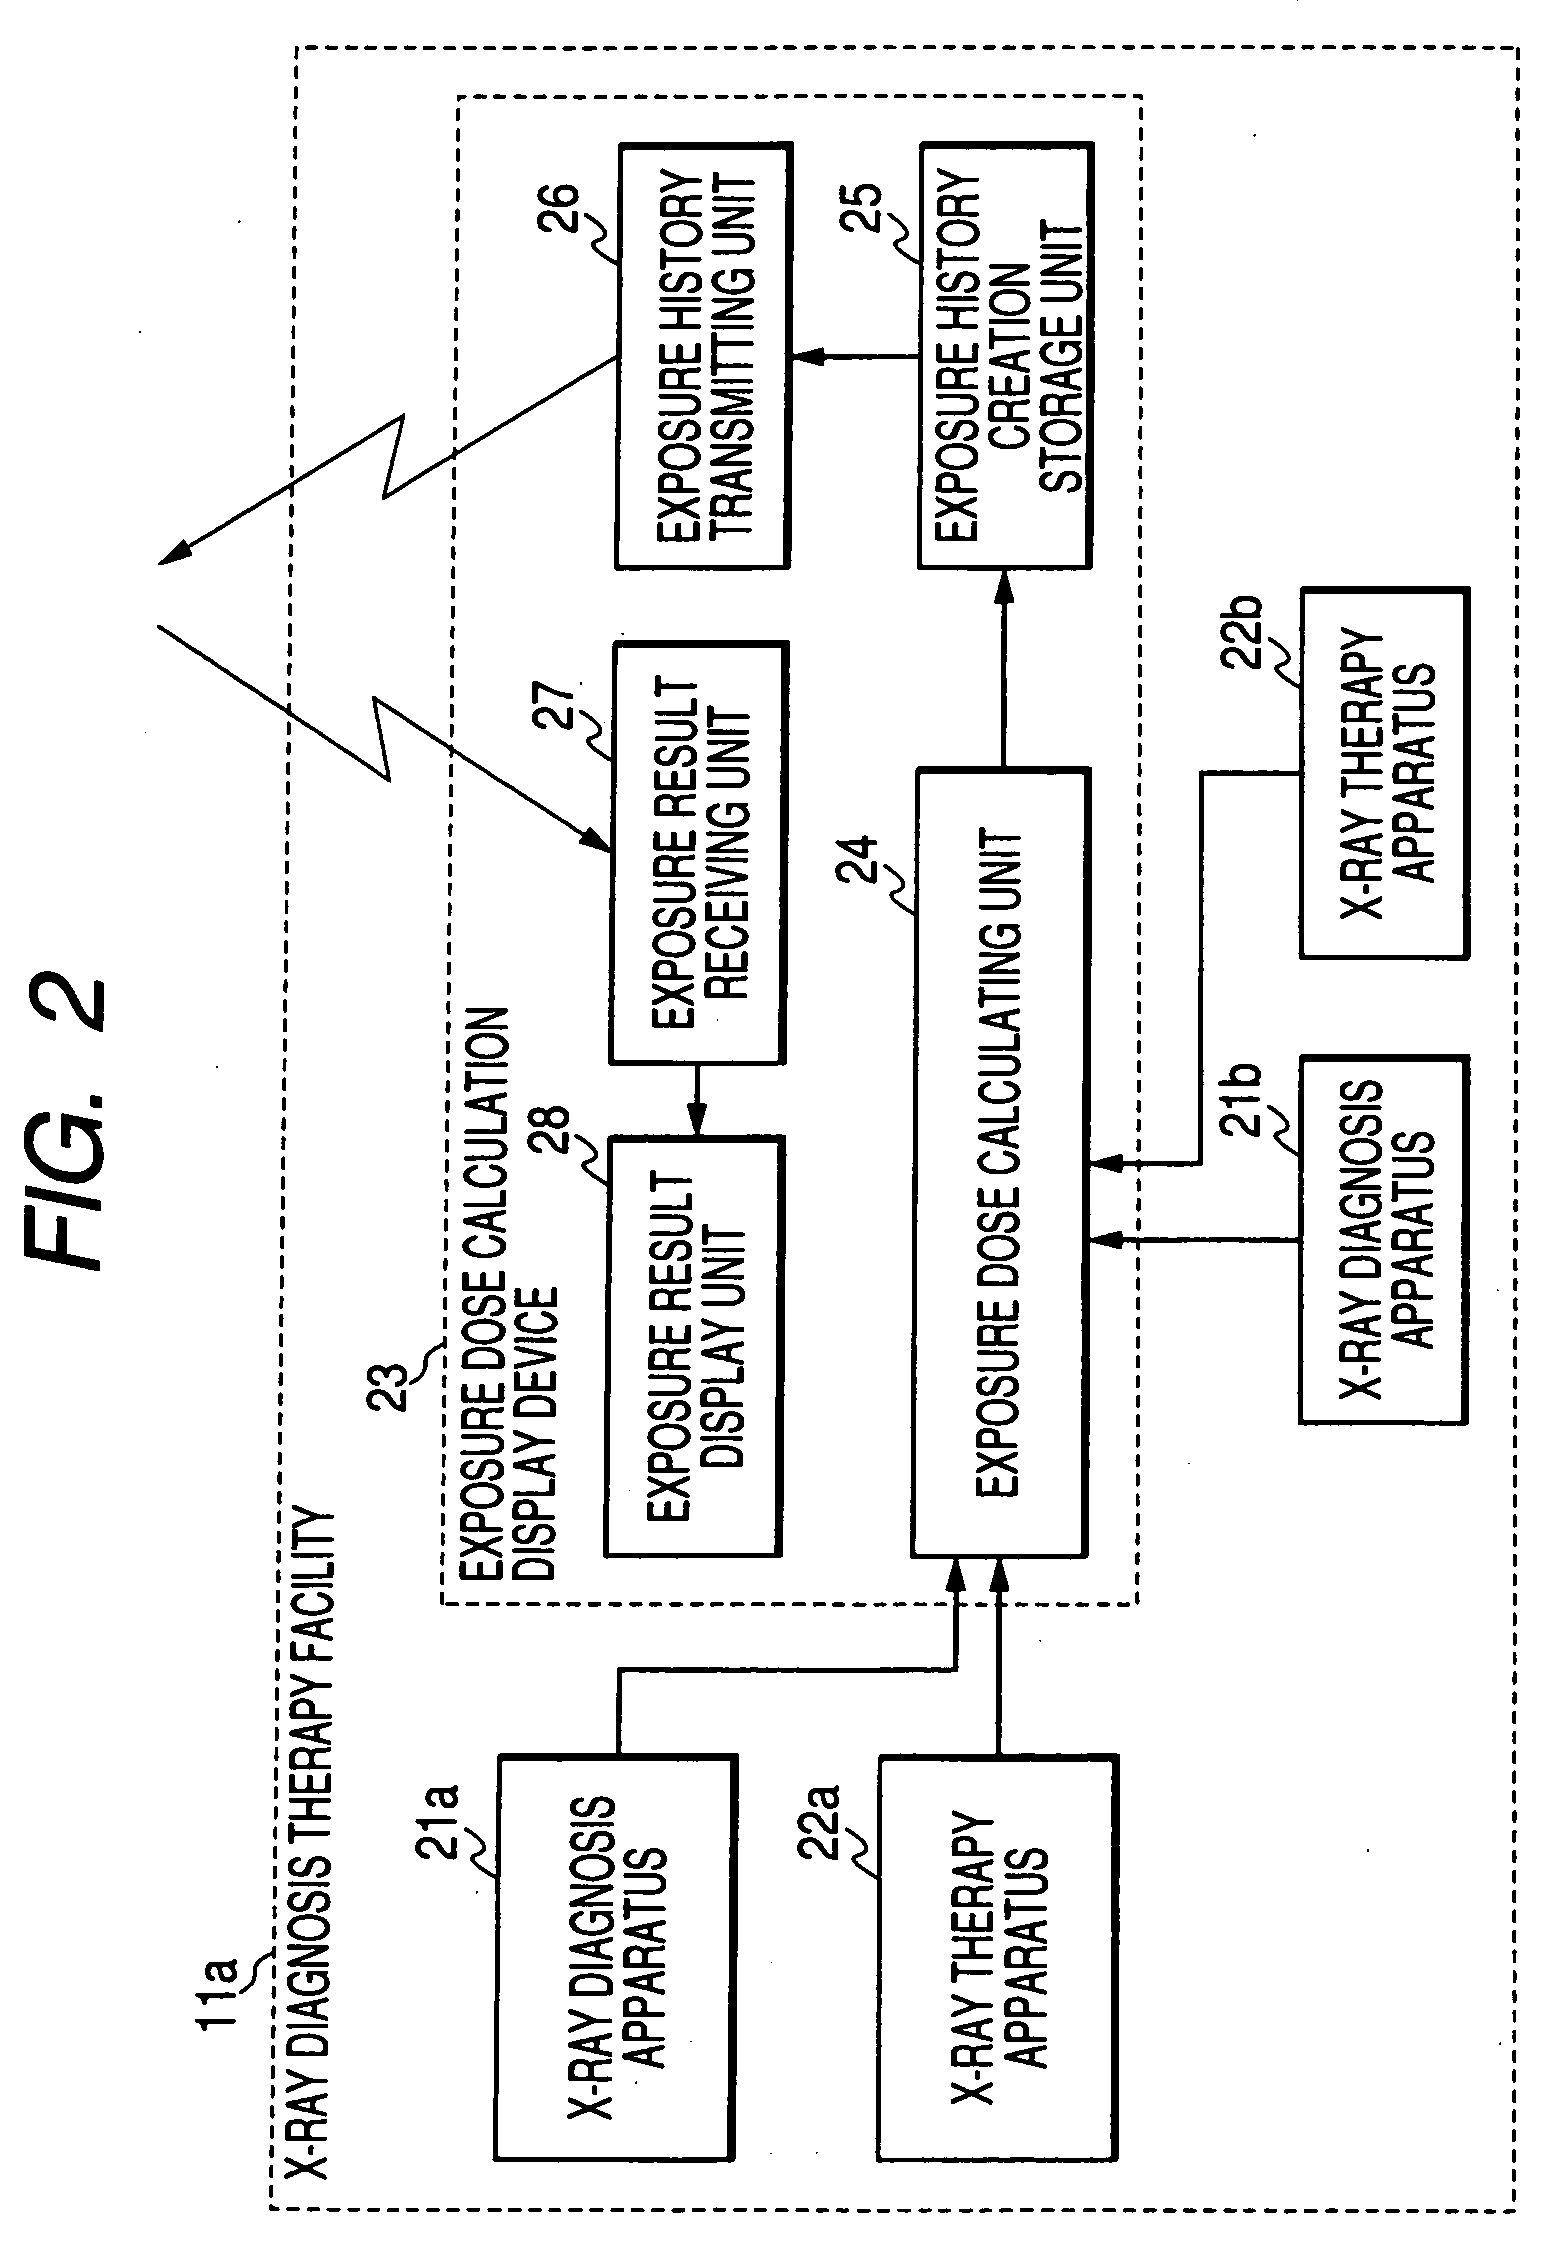 X-ray exposure report system, medical apparatus, and examination protocol distribution system